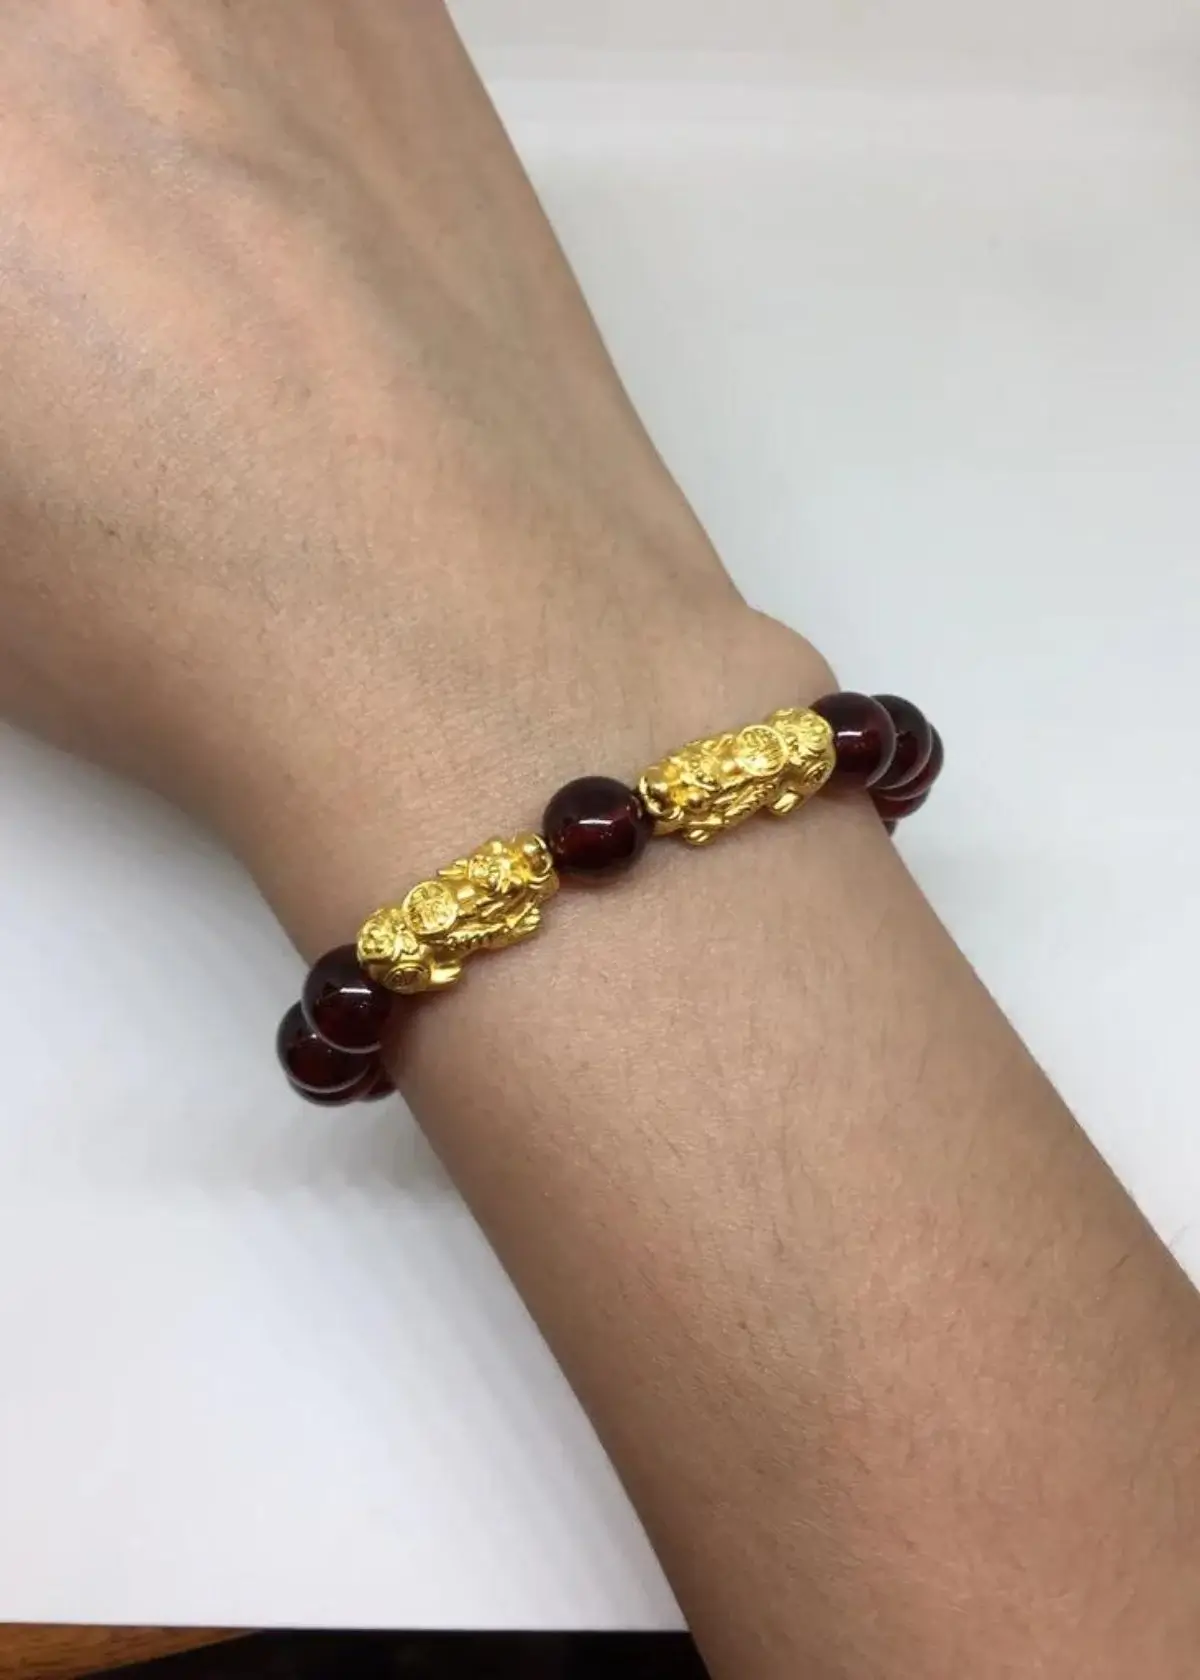 What is a Pixiu bracelet and what does it symbolize?